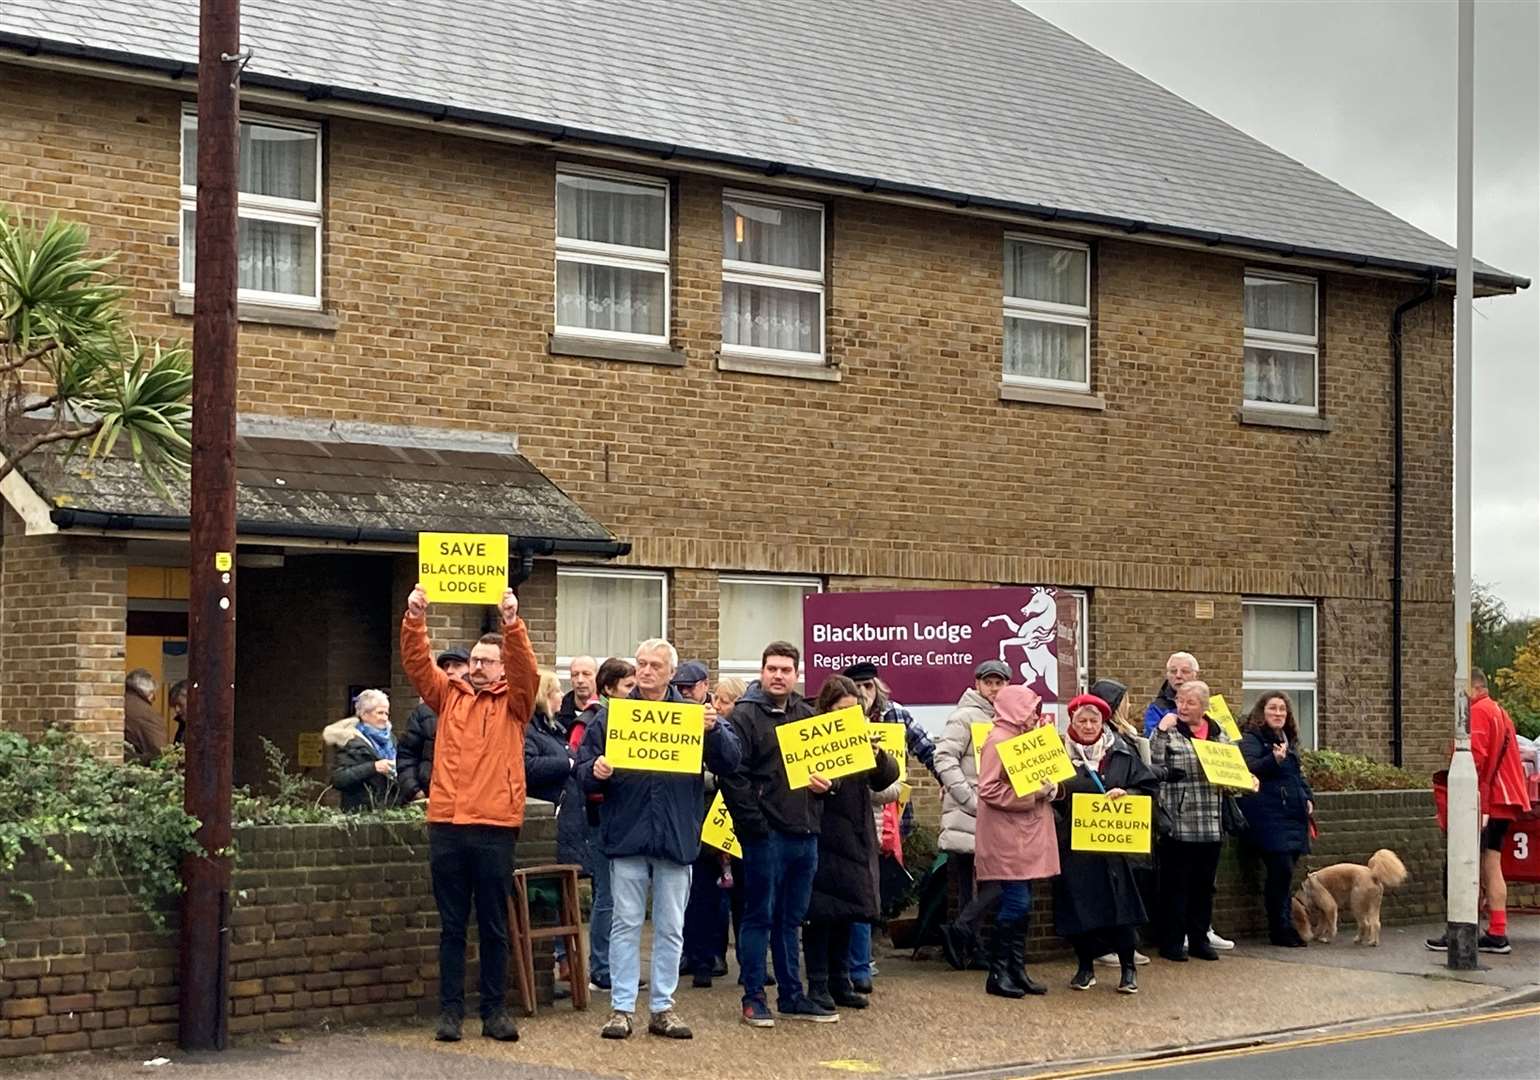 Protests outside of Blackburn Lodge in Broadway, Sheerness